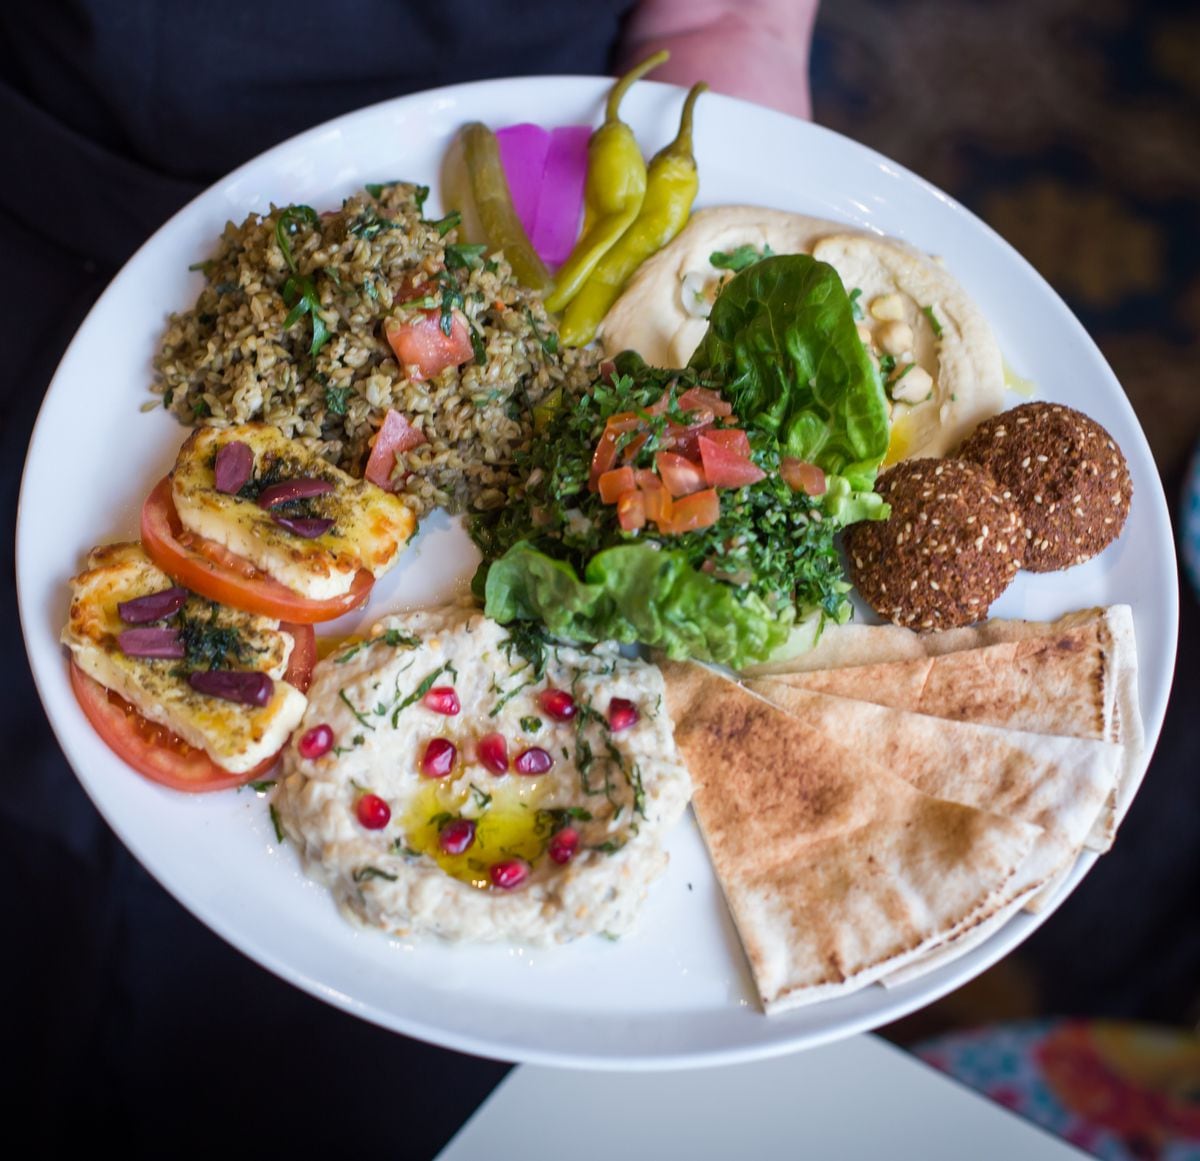 This one’s not for sharing – mezze for one